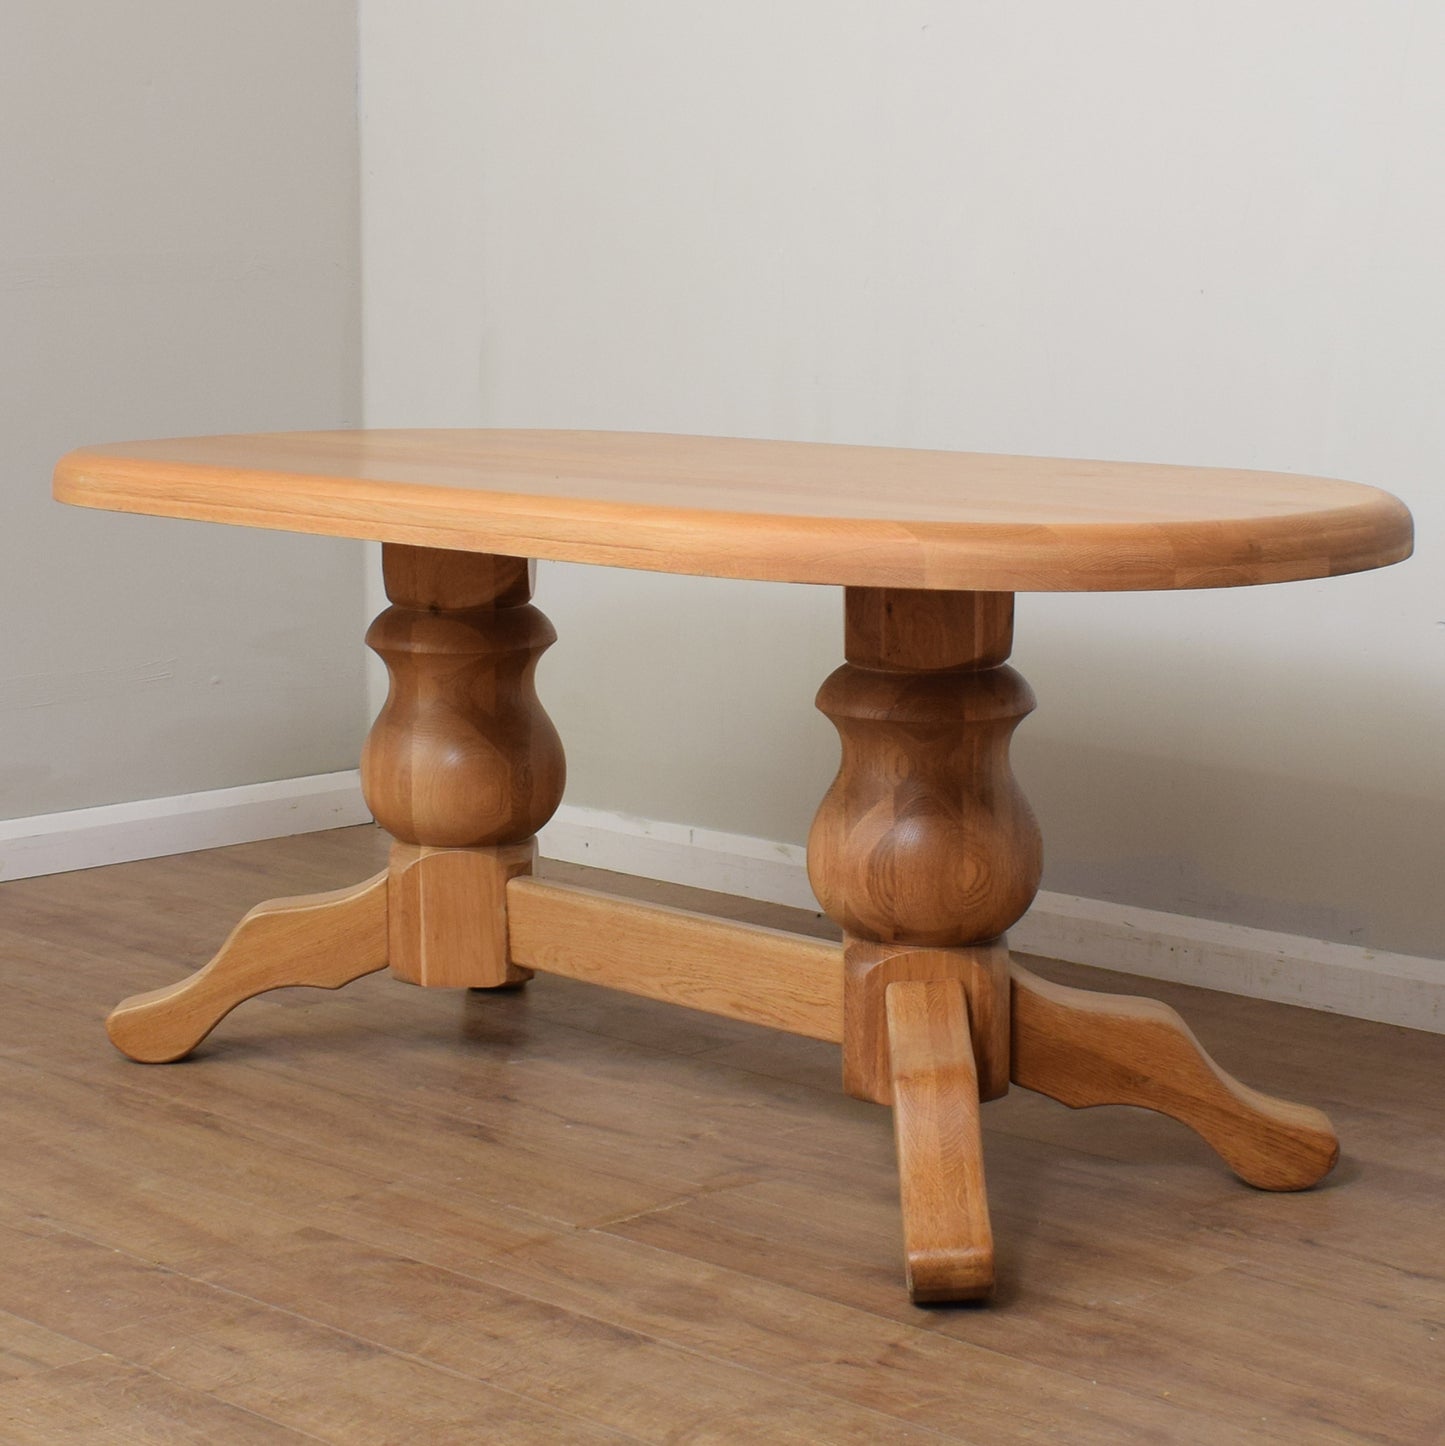 Solid Oak Table and Six Chairs